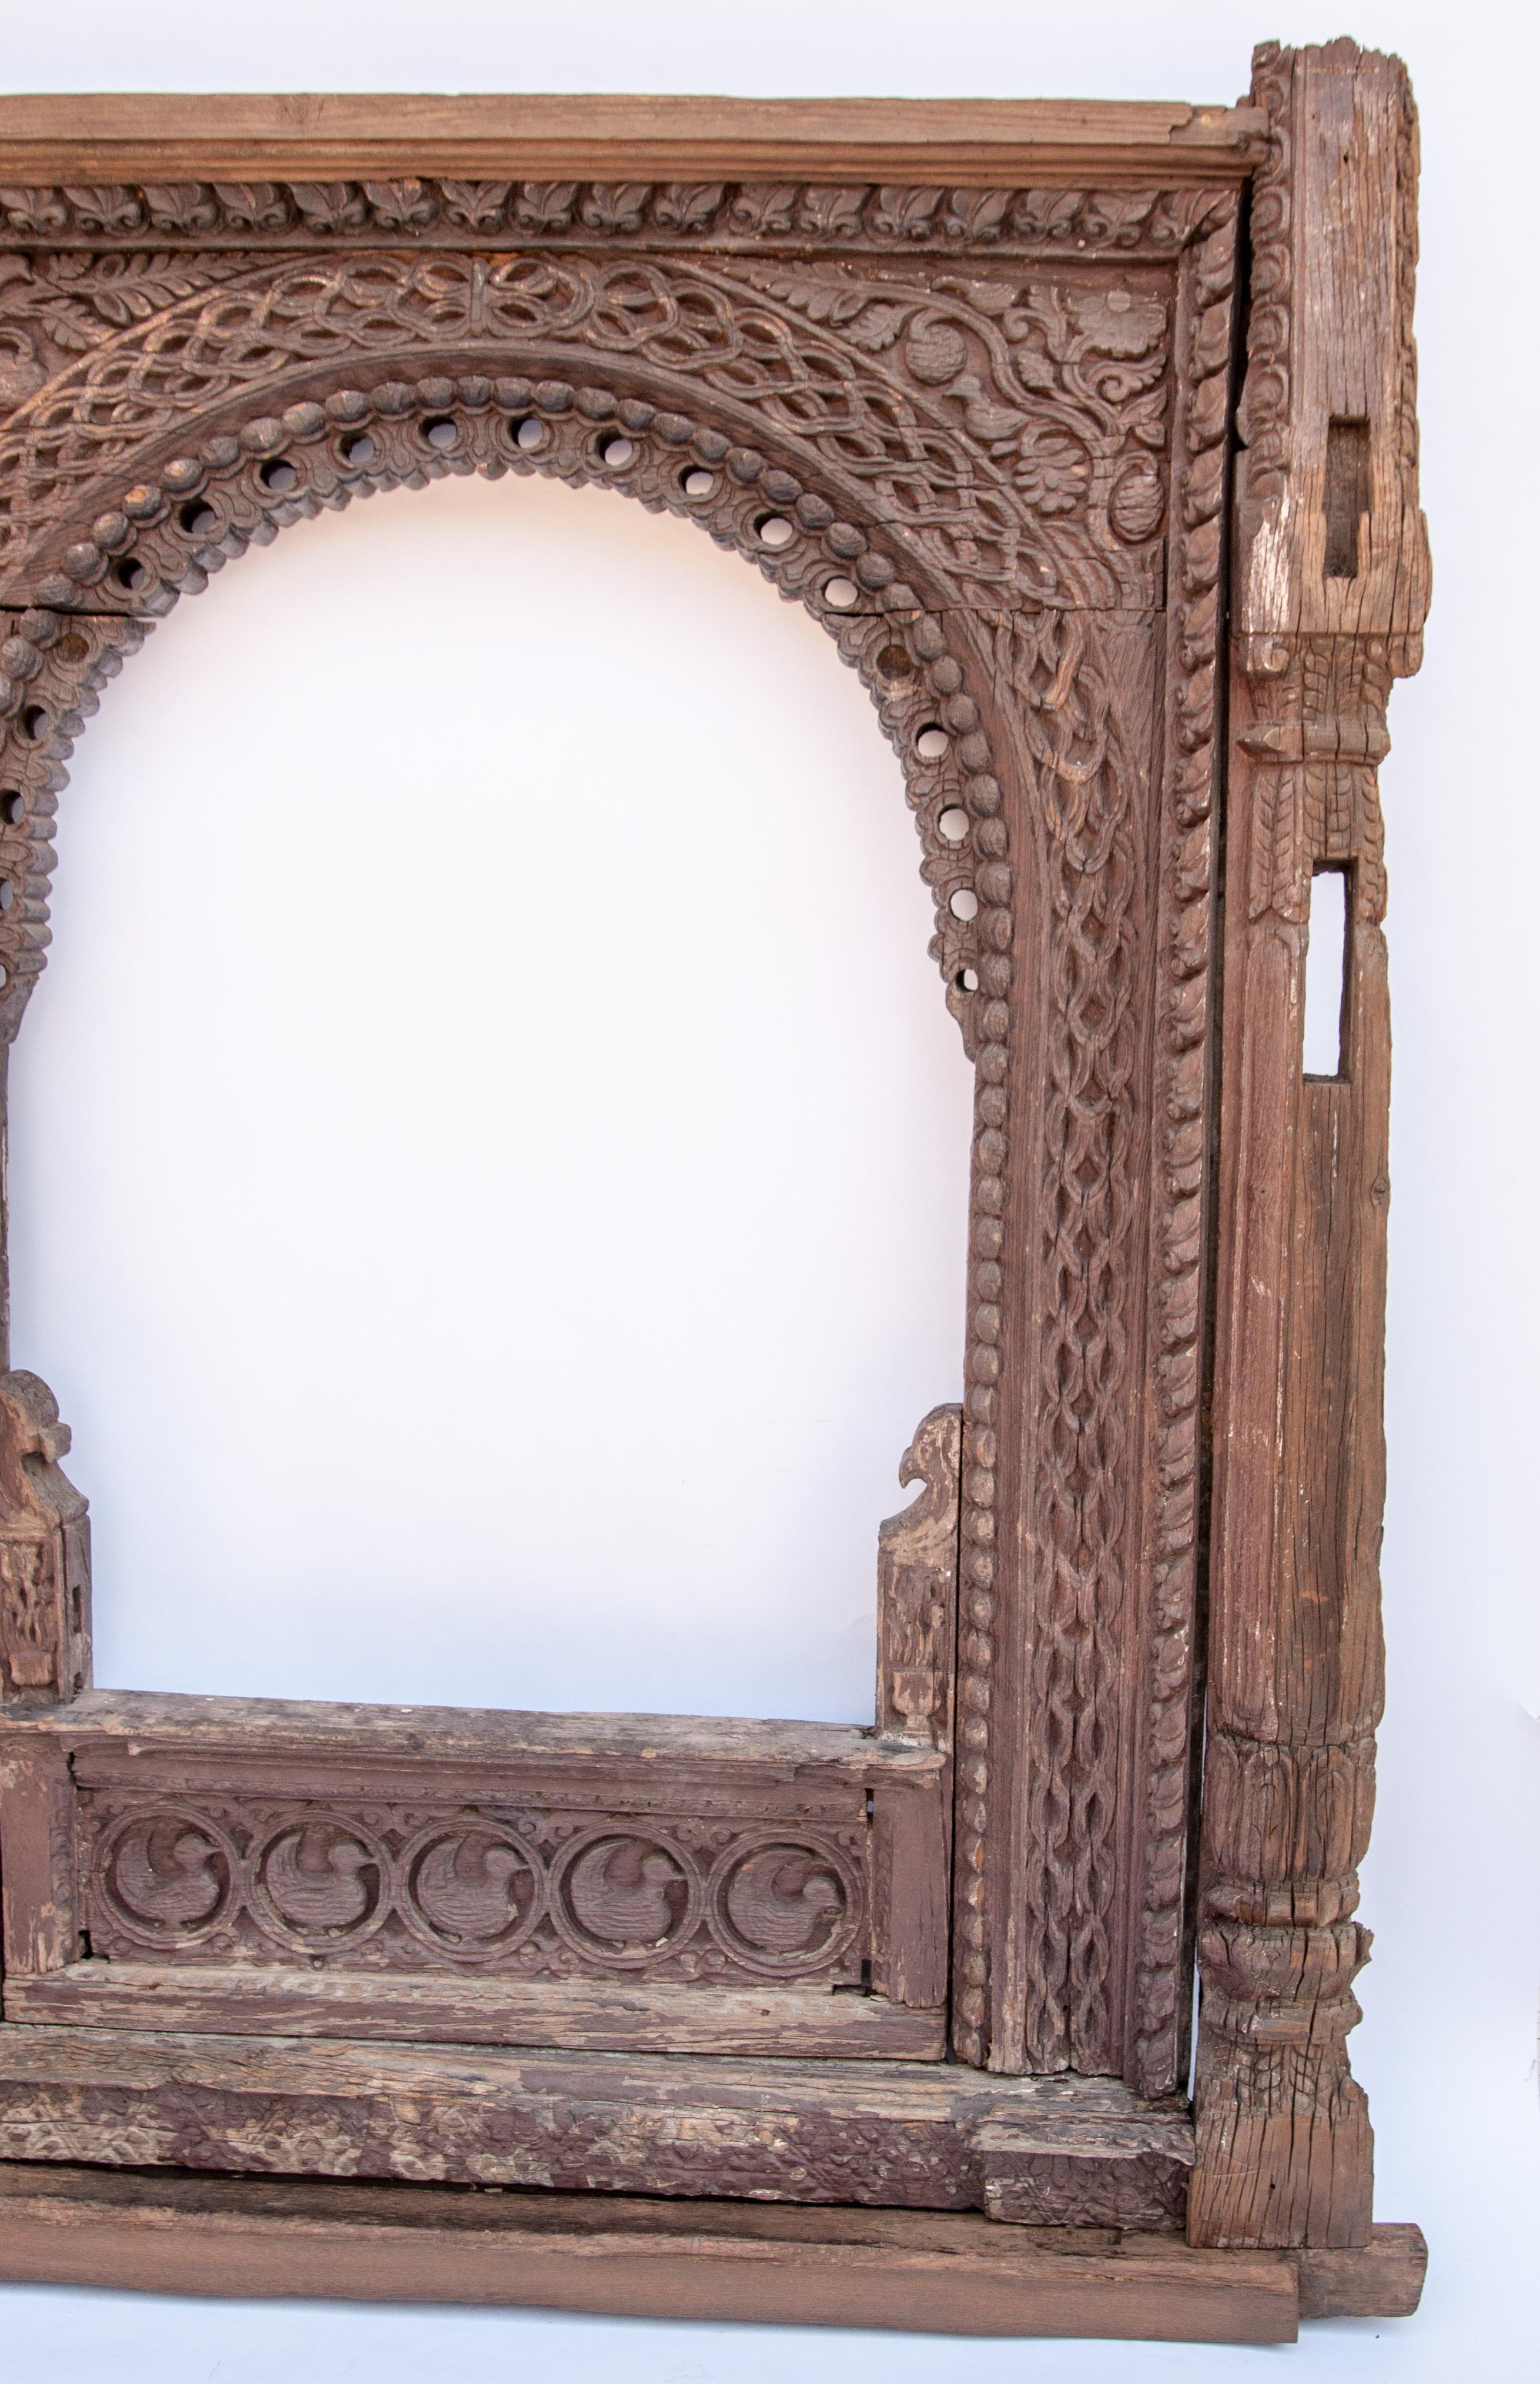 Anglo-Indian Hand Carved Newar Window Frame Late 19th Century, Kathmandu Valley, Nepal